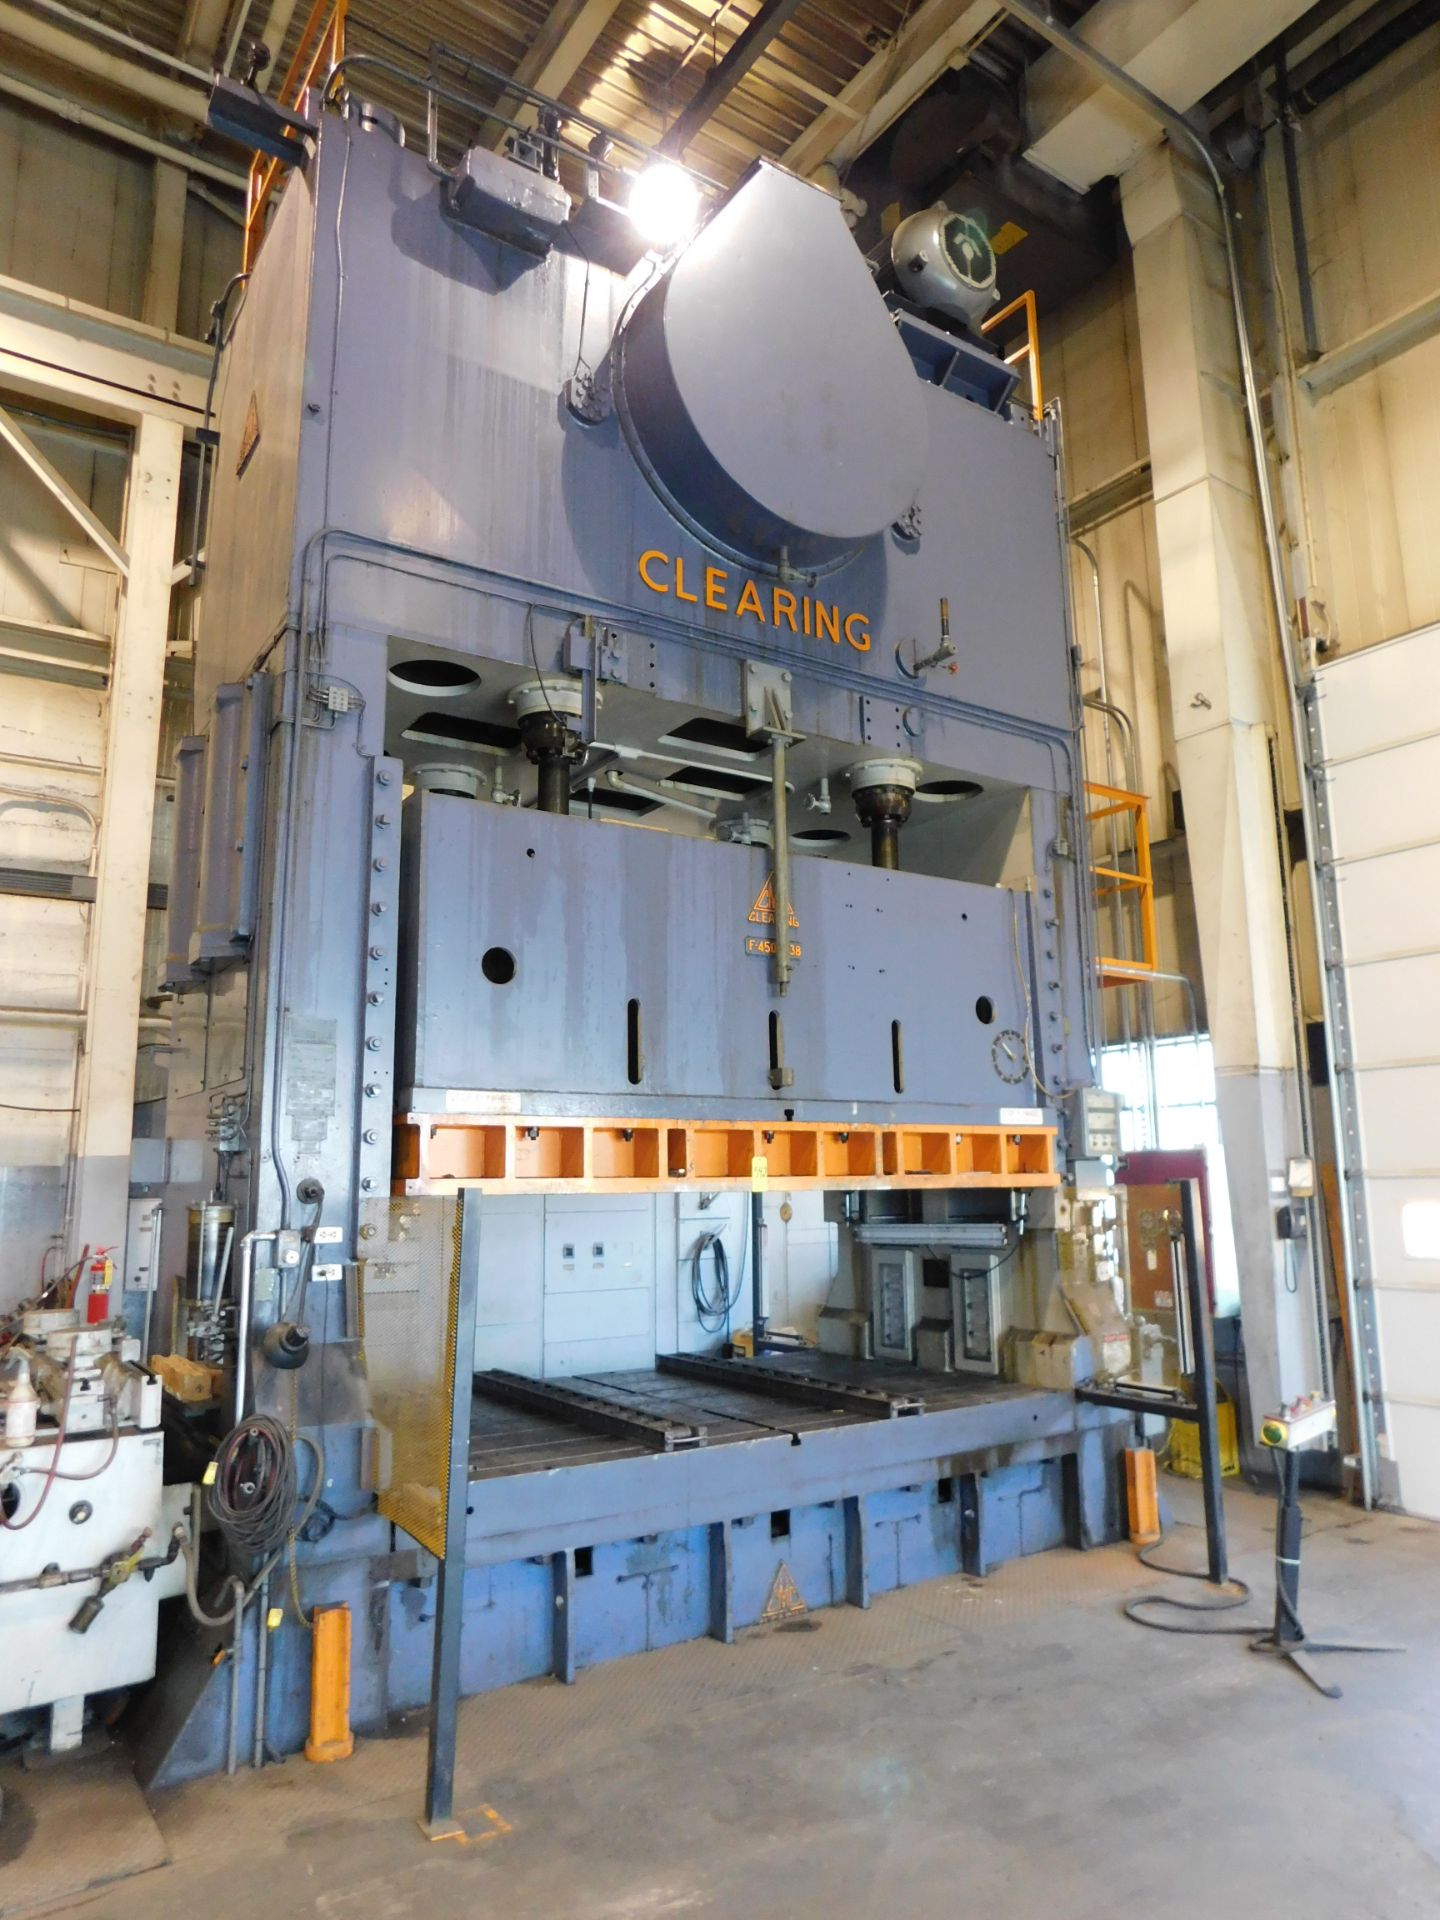 Clearing Model F-4500-138 Straight Side Press, S/N 18249, 500 Ton, 18" Stroke, 56" Shut Height, 136" - Image 10 of 10